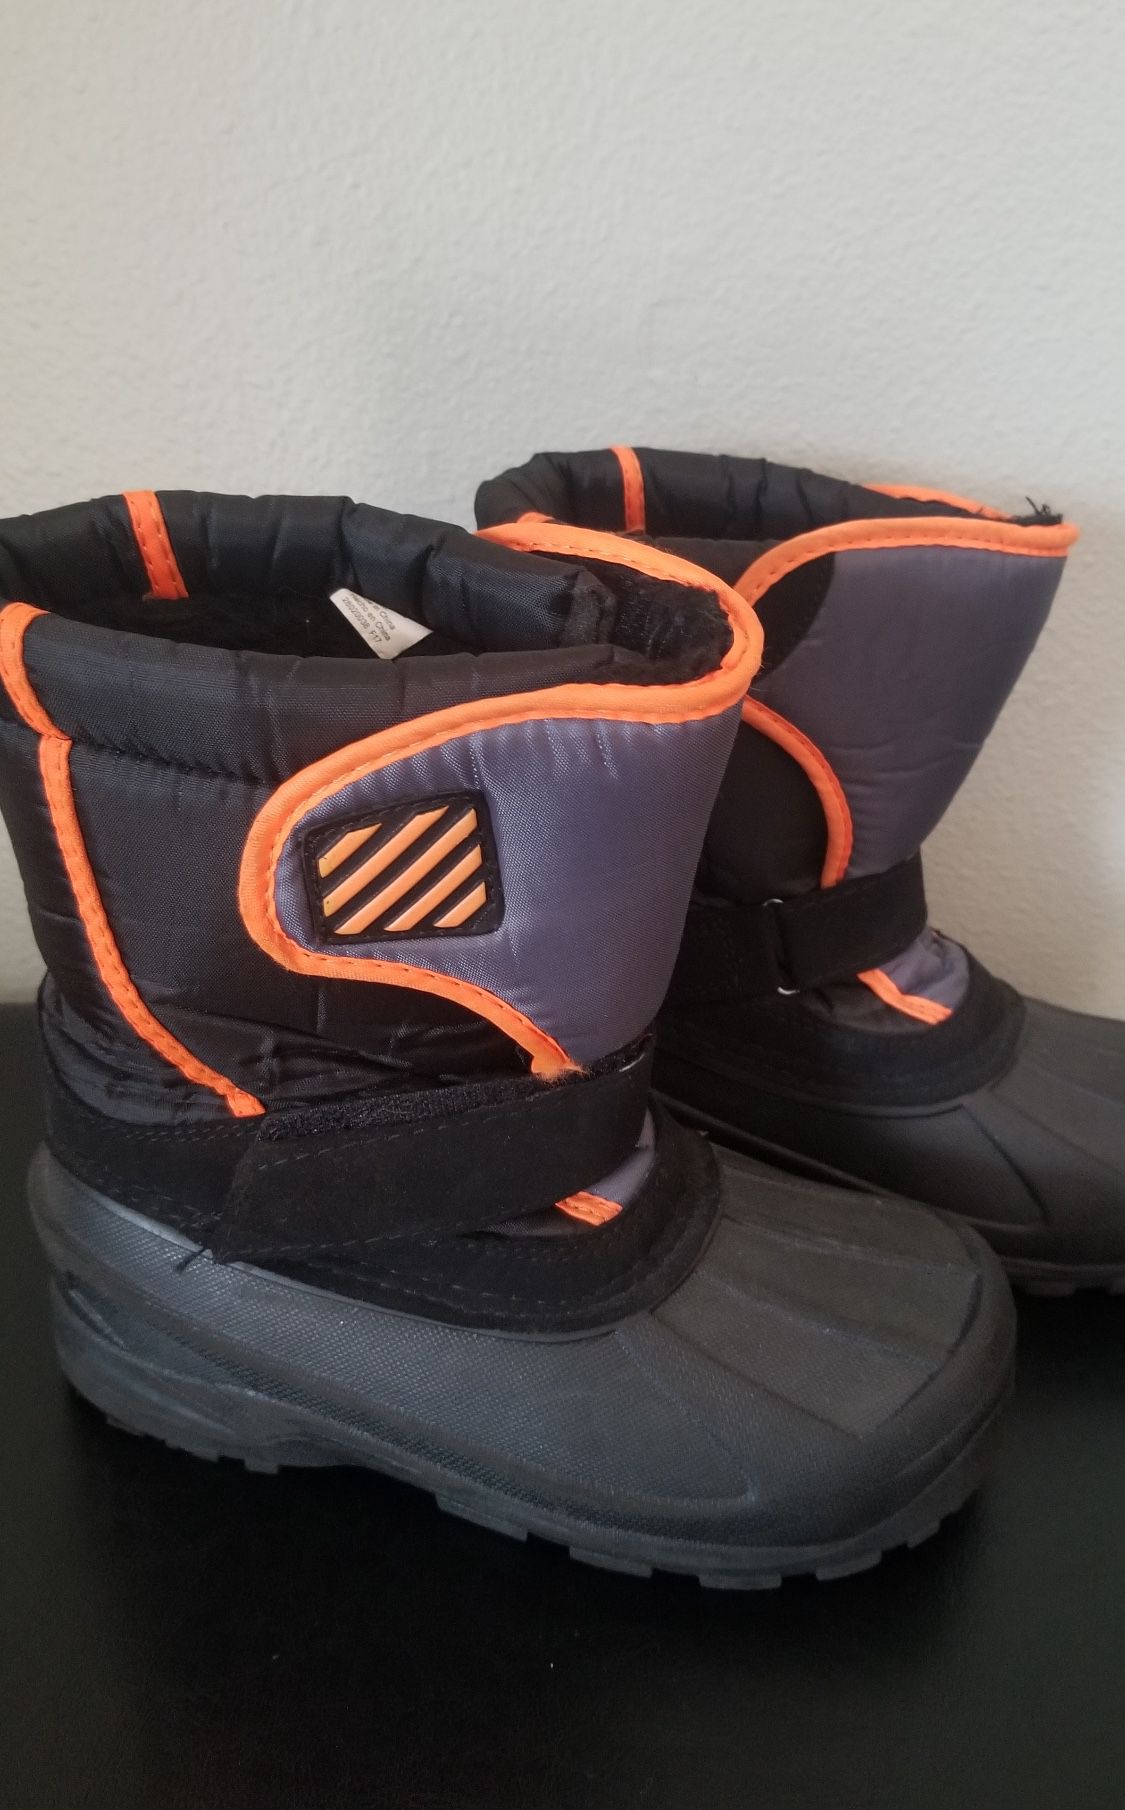 Snow boots size 3